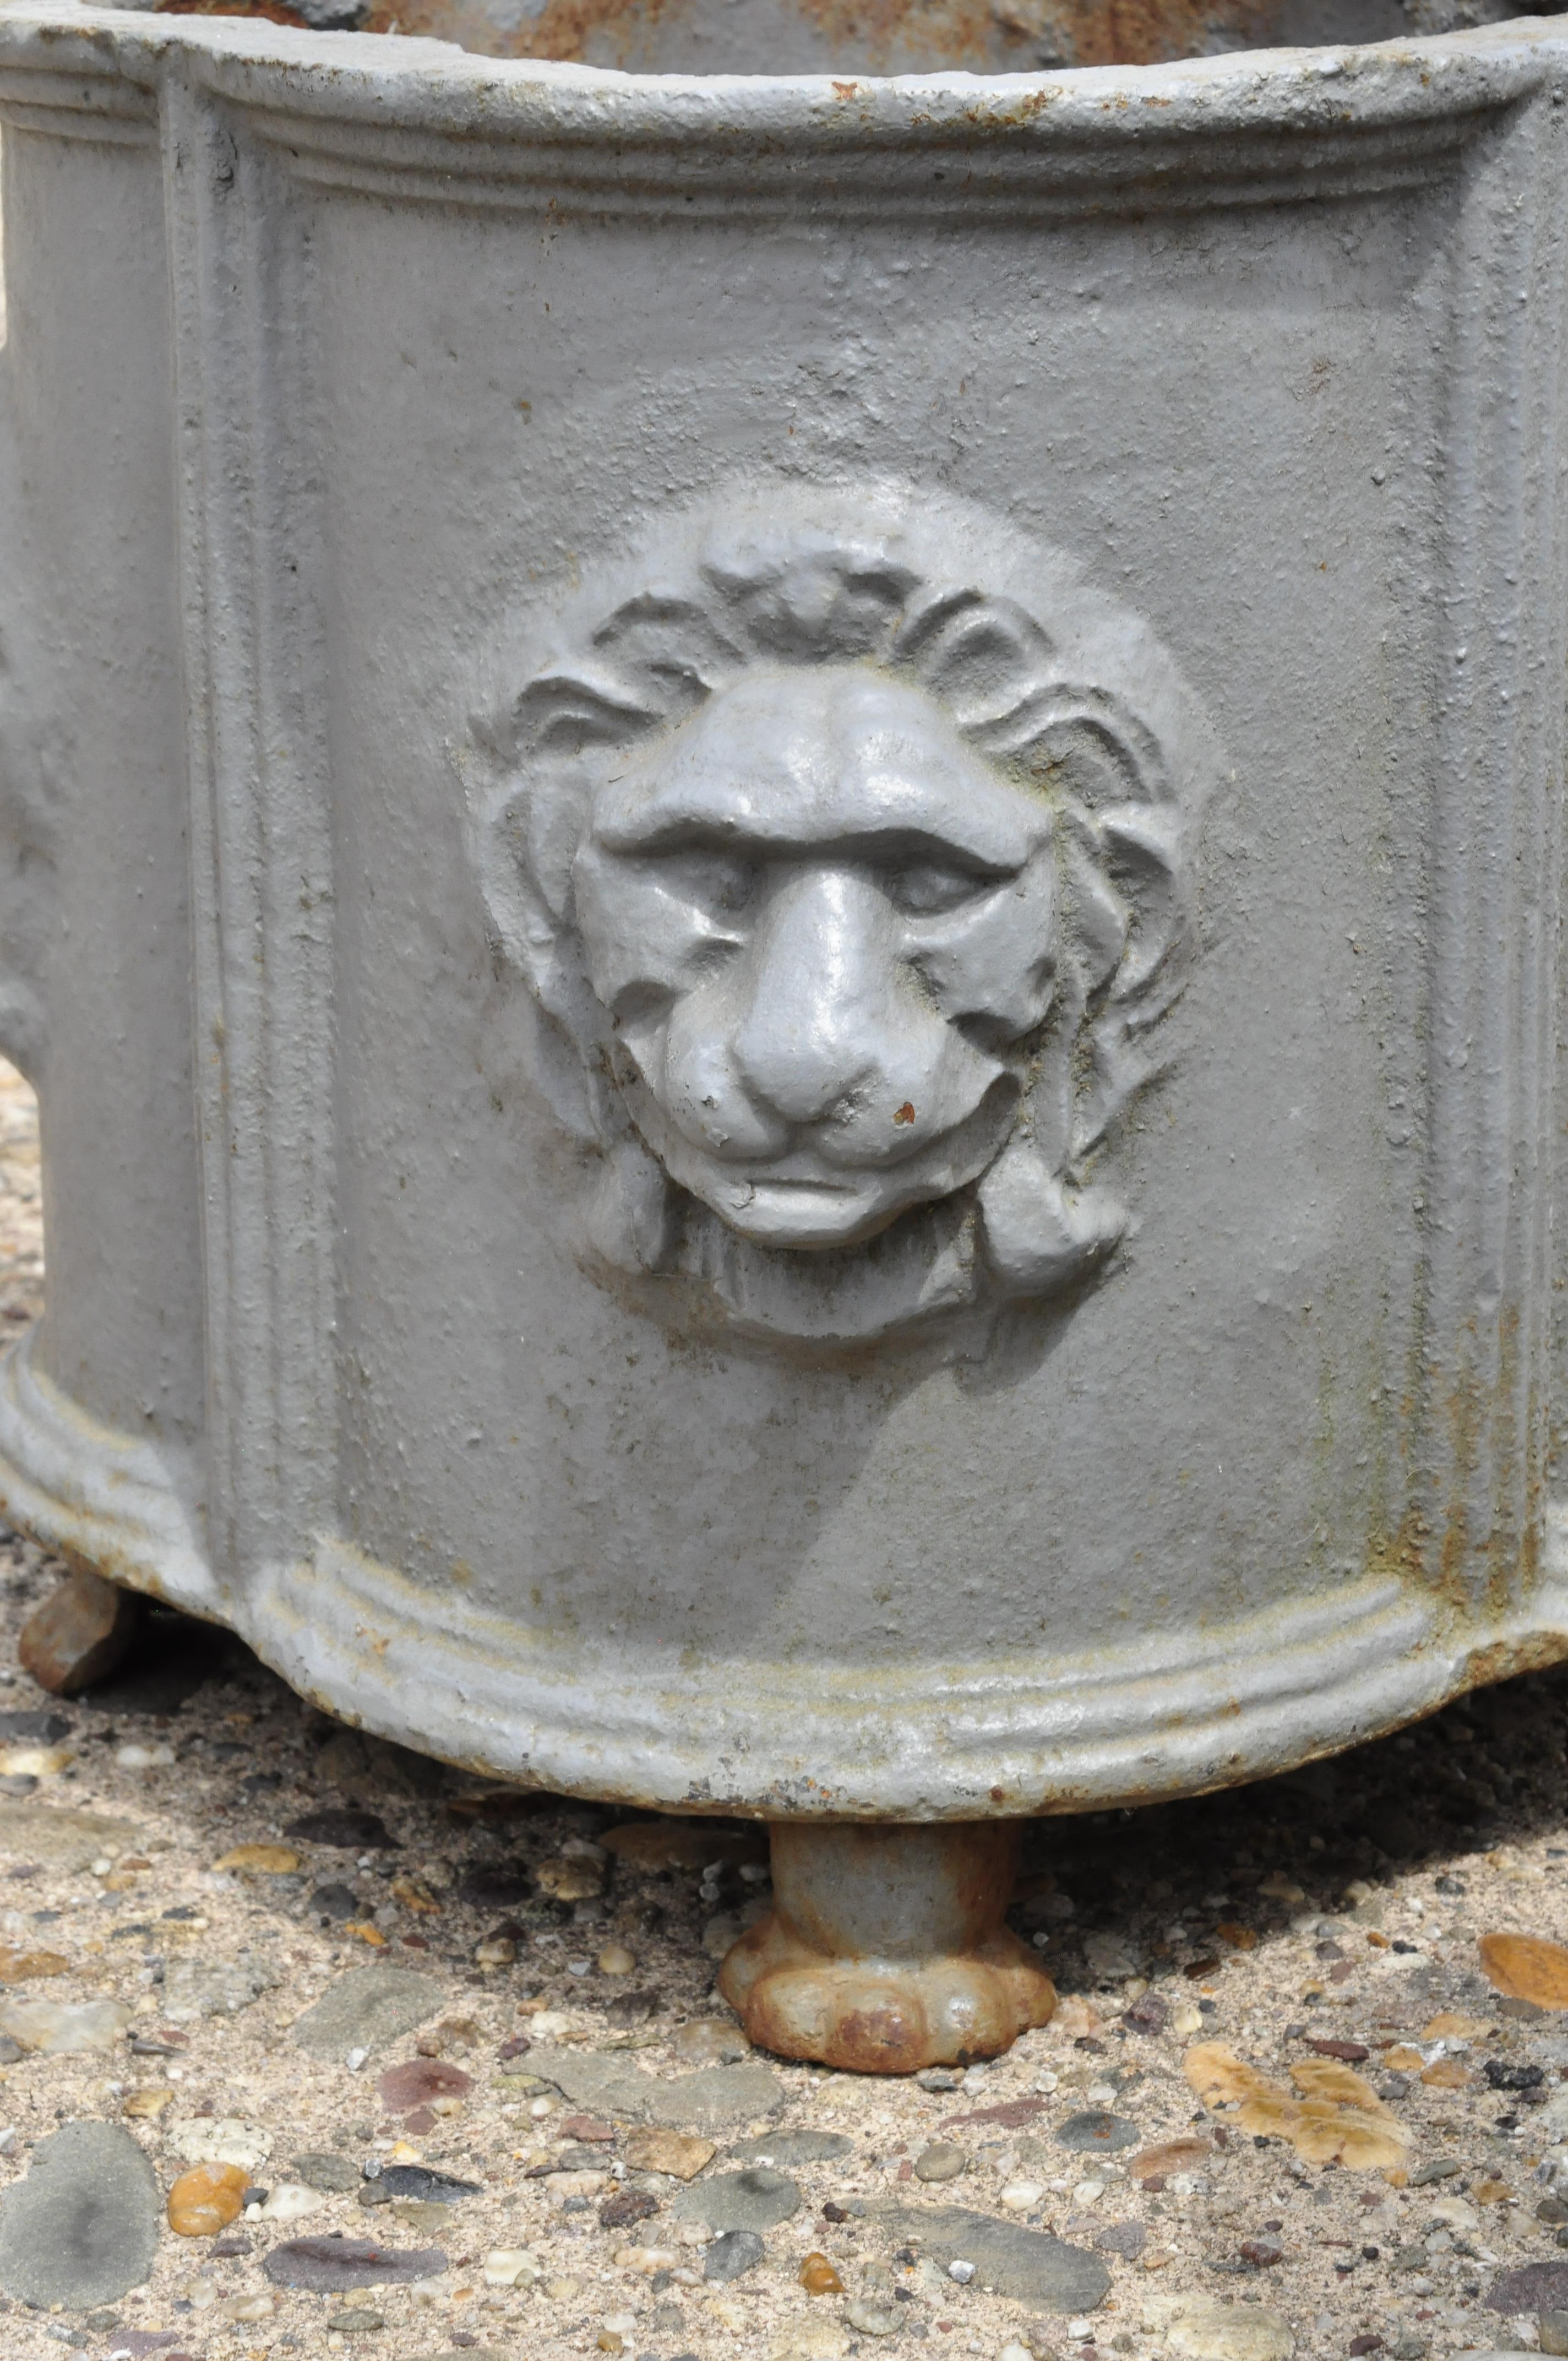 American Pair of Antique Cast Iron French Empire Style Planter Pots with Lion Heads